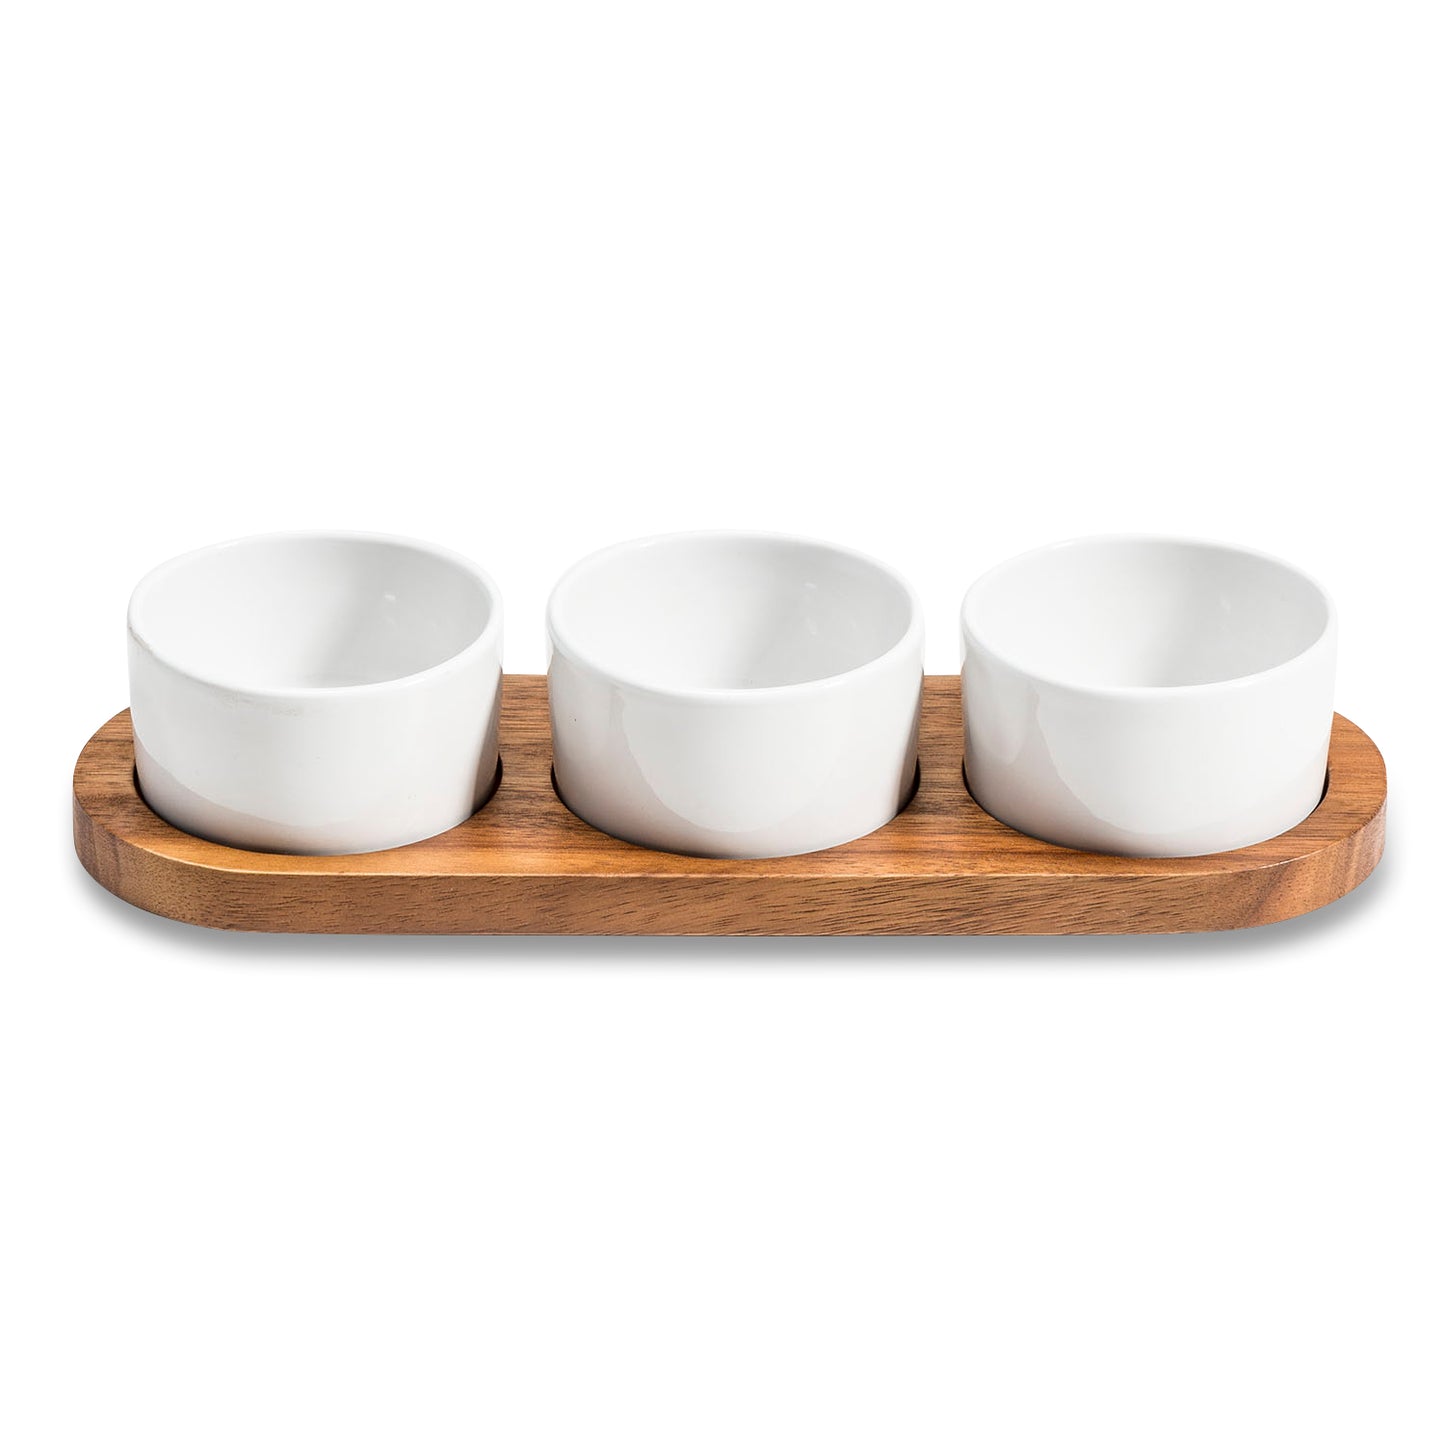 Round White Condiment Bowls With Lids and Acacia Wood Serving Tray | Ceramic Set